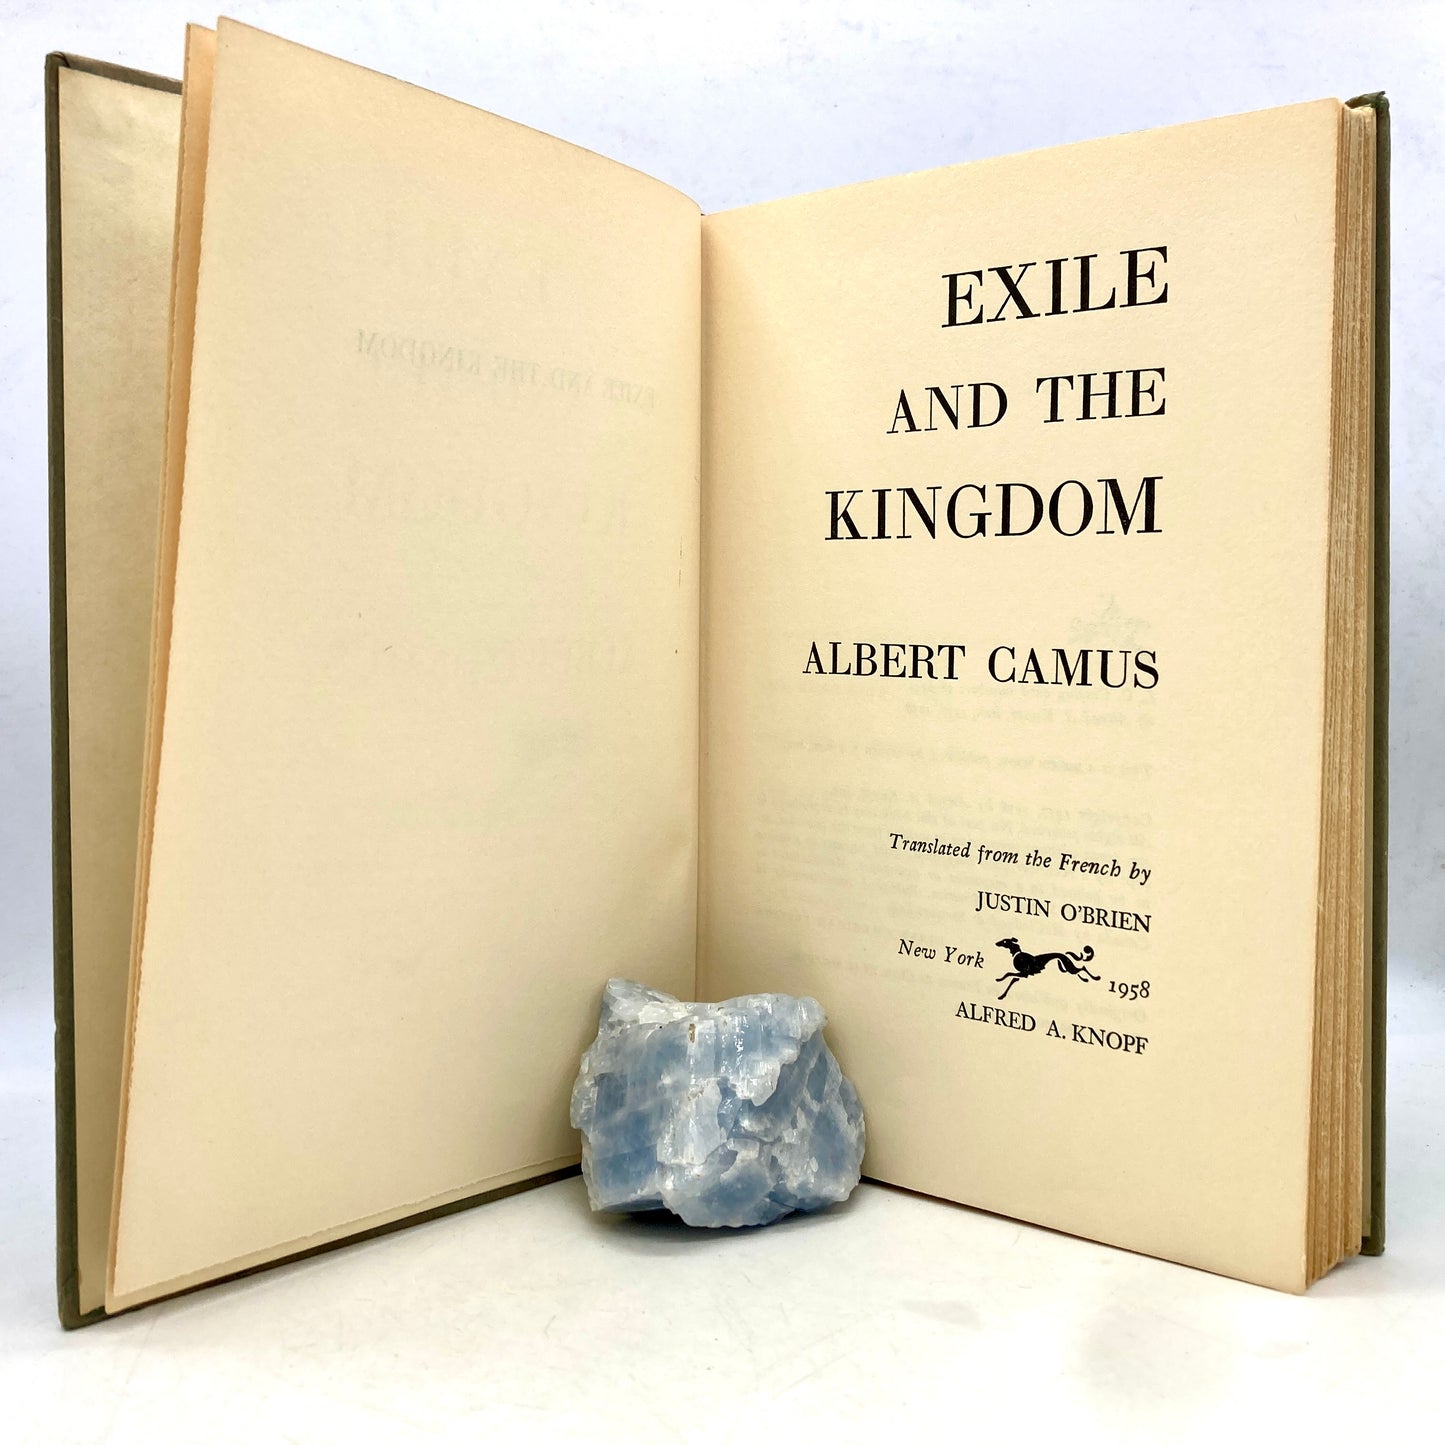 CAMUS, Albert "Exile and The Kingdom" [Alfred A. Knopf, 1958] 1st American